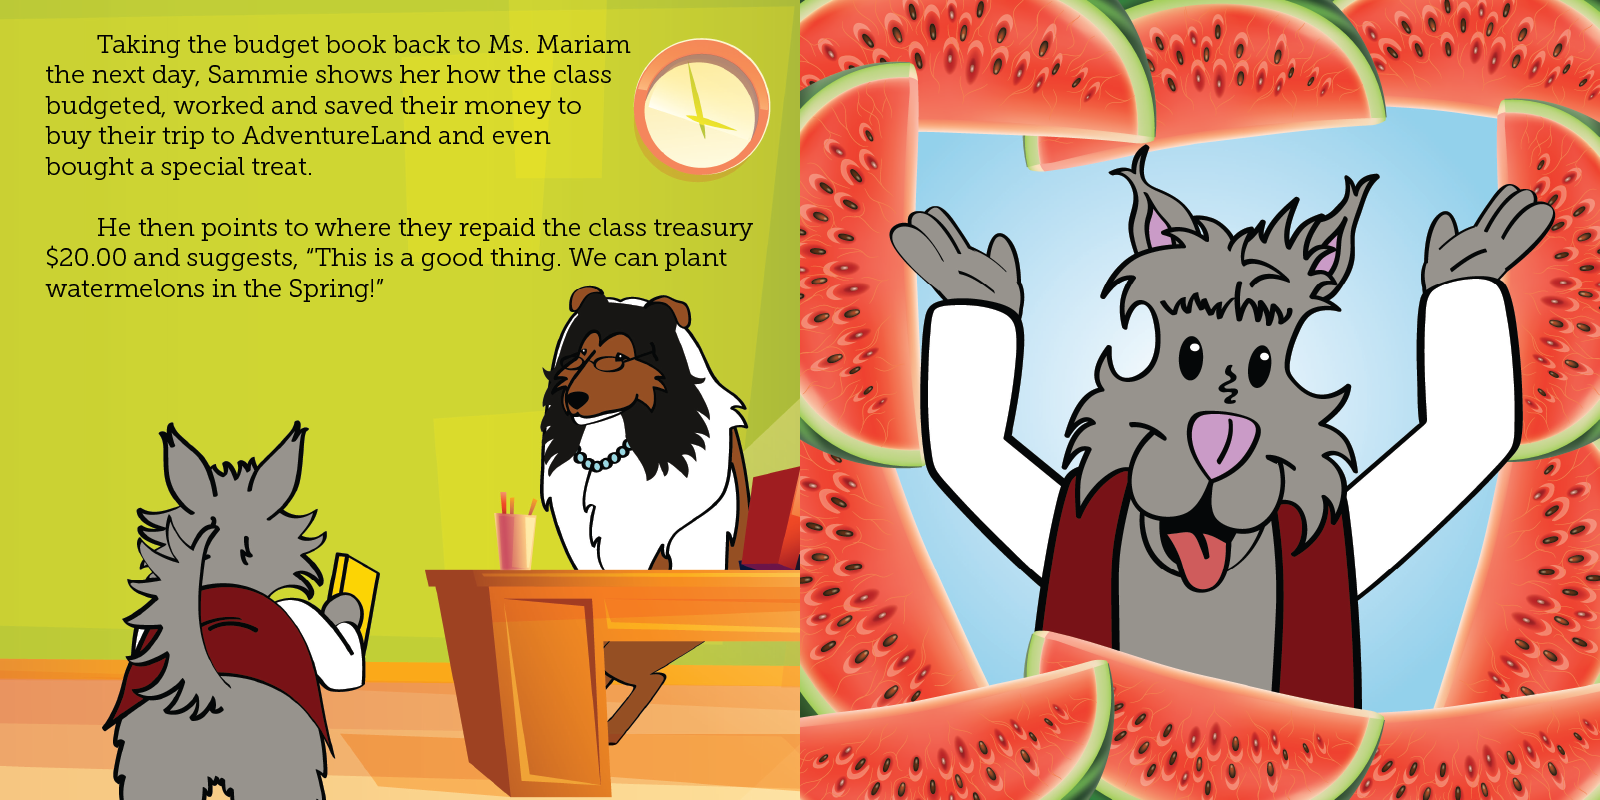 Slide 13 of the Sammie and the Pumpkin Patch E-book